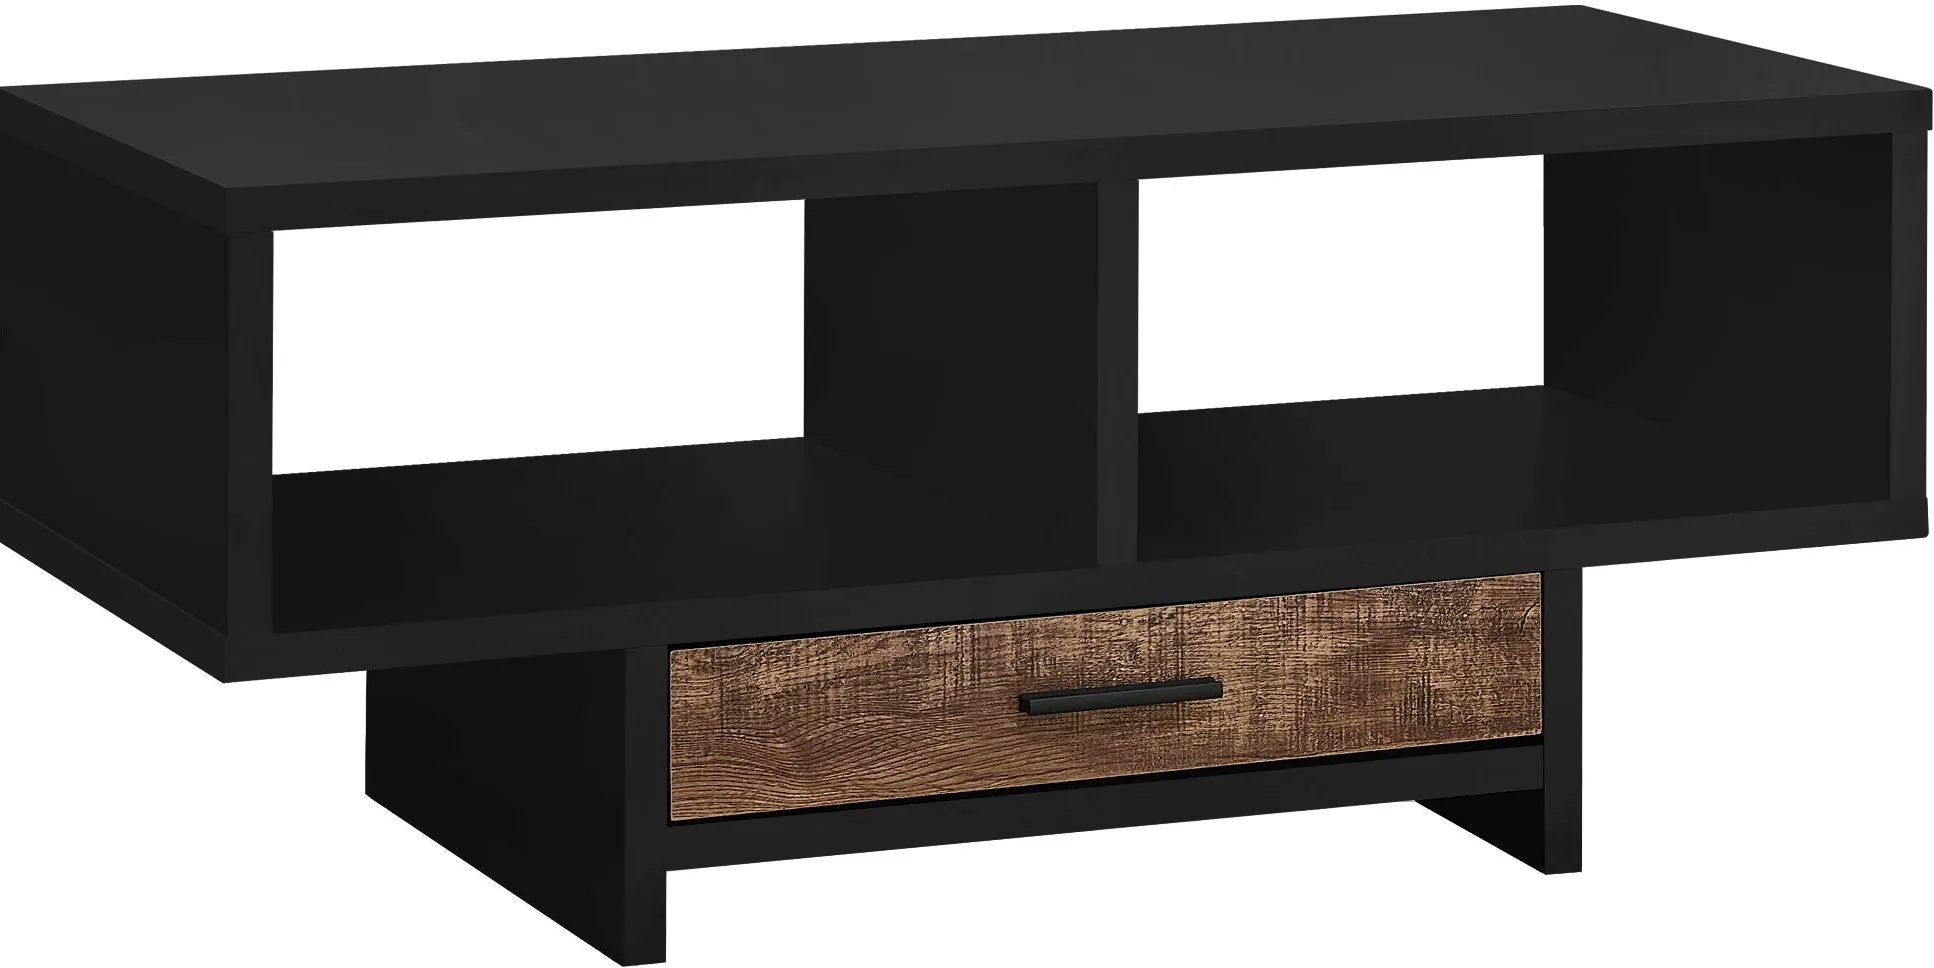 Coffee Table, Accent, Cocktail, Rectangular, Storage, Living Room, 42" L, Drawer, Laminate, Black, Brown, Contemporary, Modern